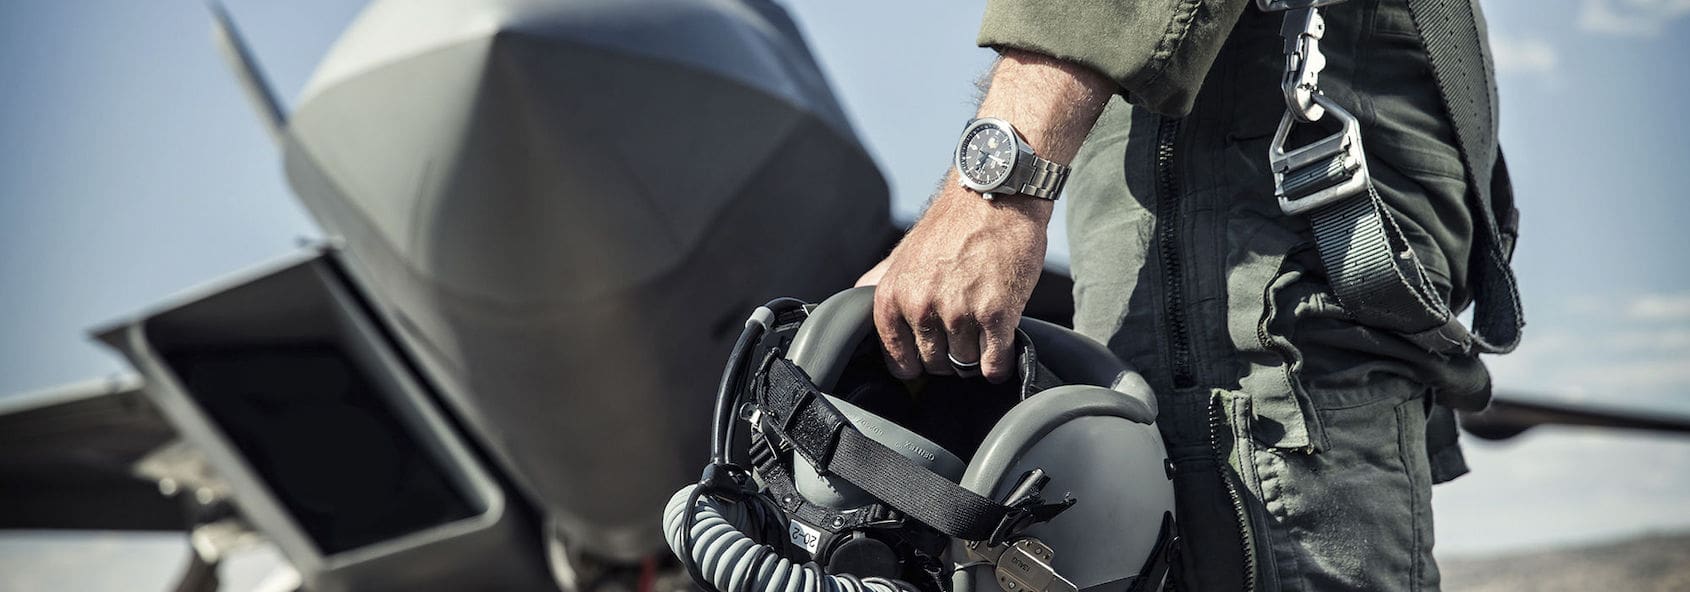 Looking at the Bremont Military Watches and Special Projects Division